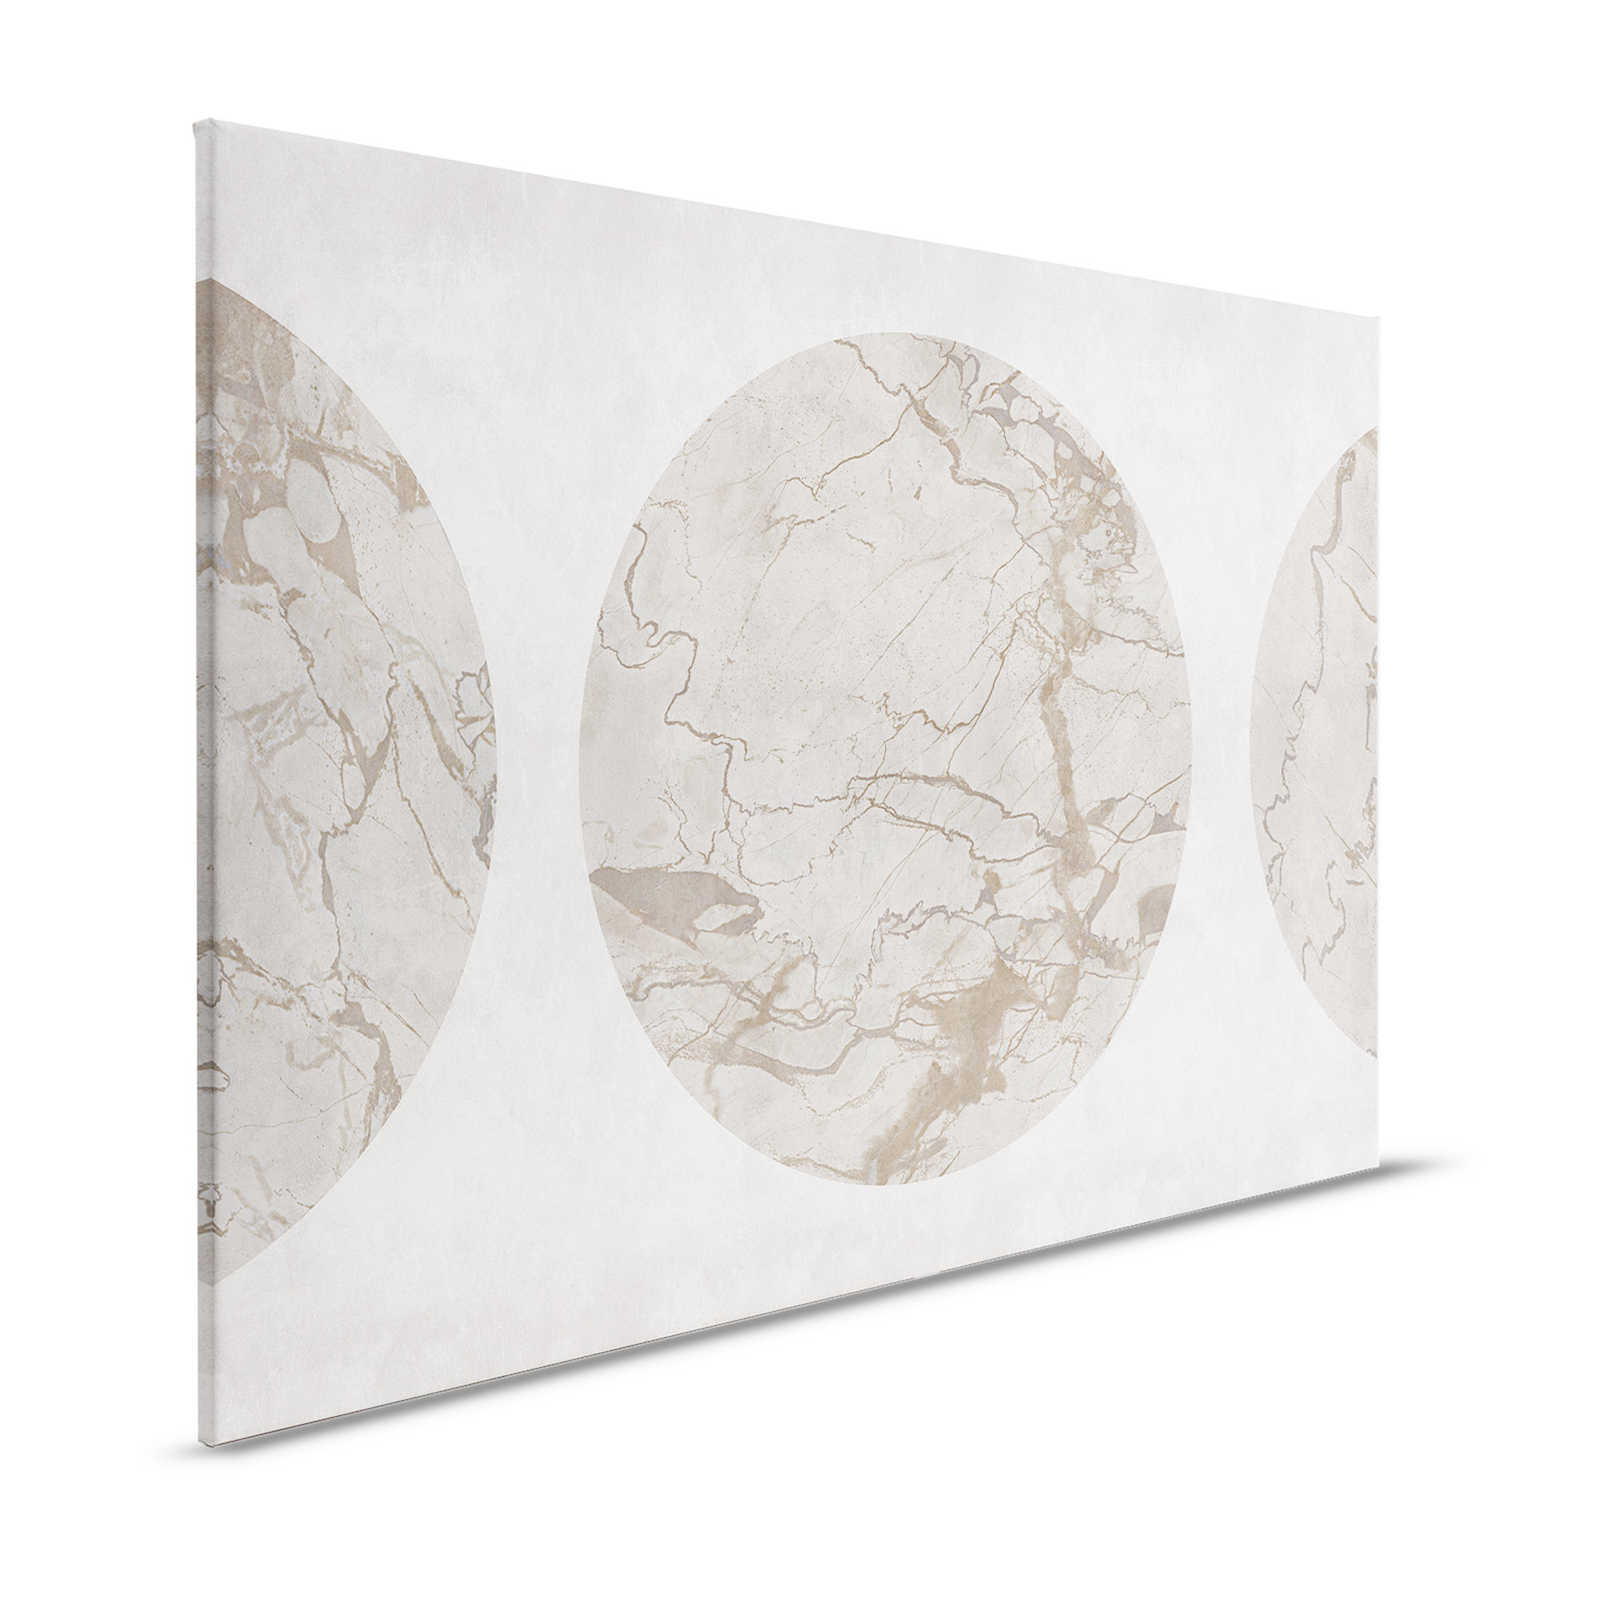 Mercurio 1 - Grey Canvas Painting Marble Greige with Circle Motif - 1.20 m x 0.80 m
